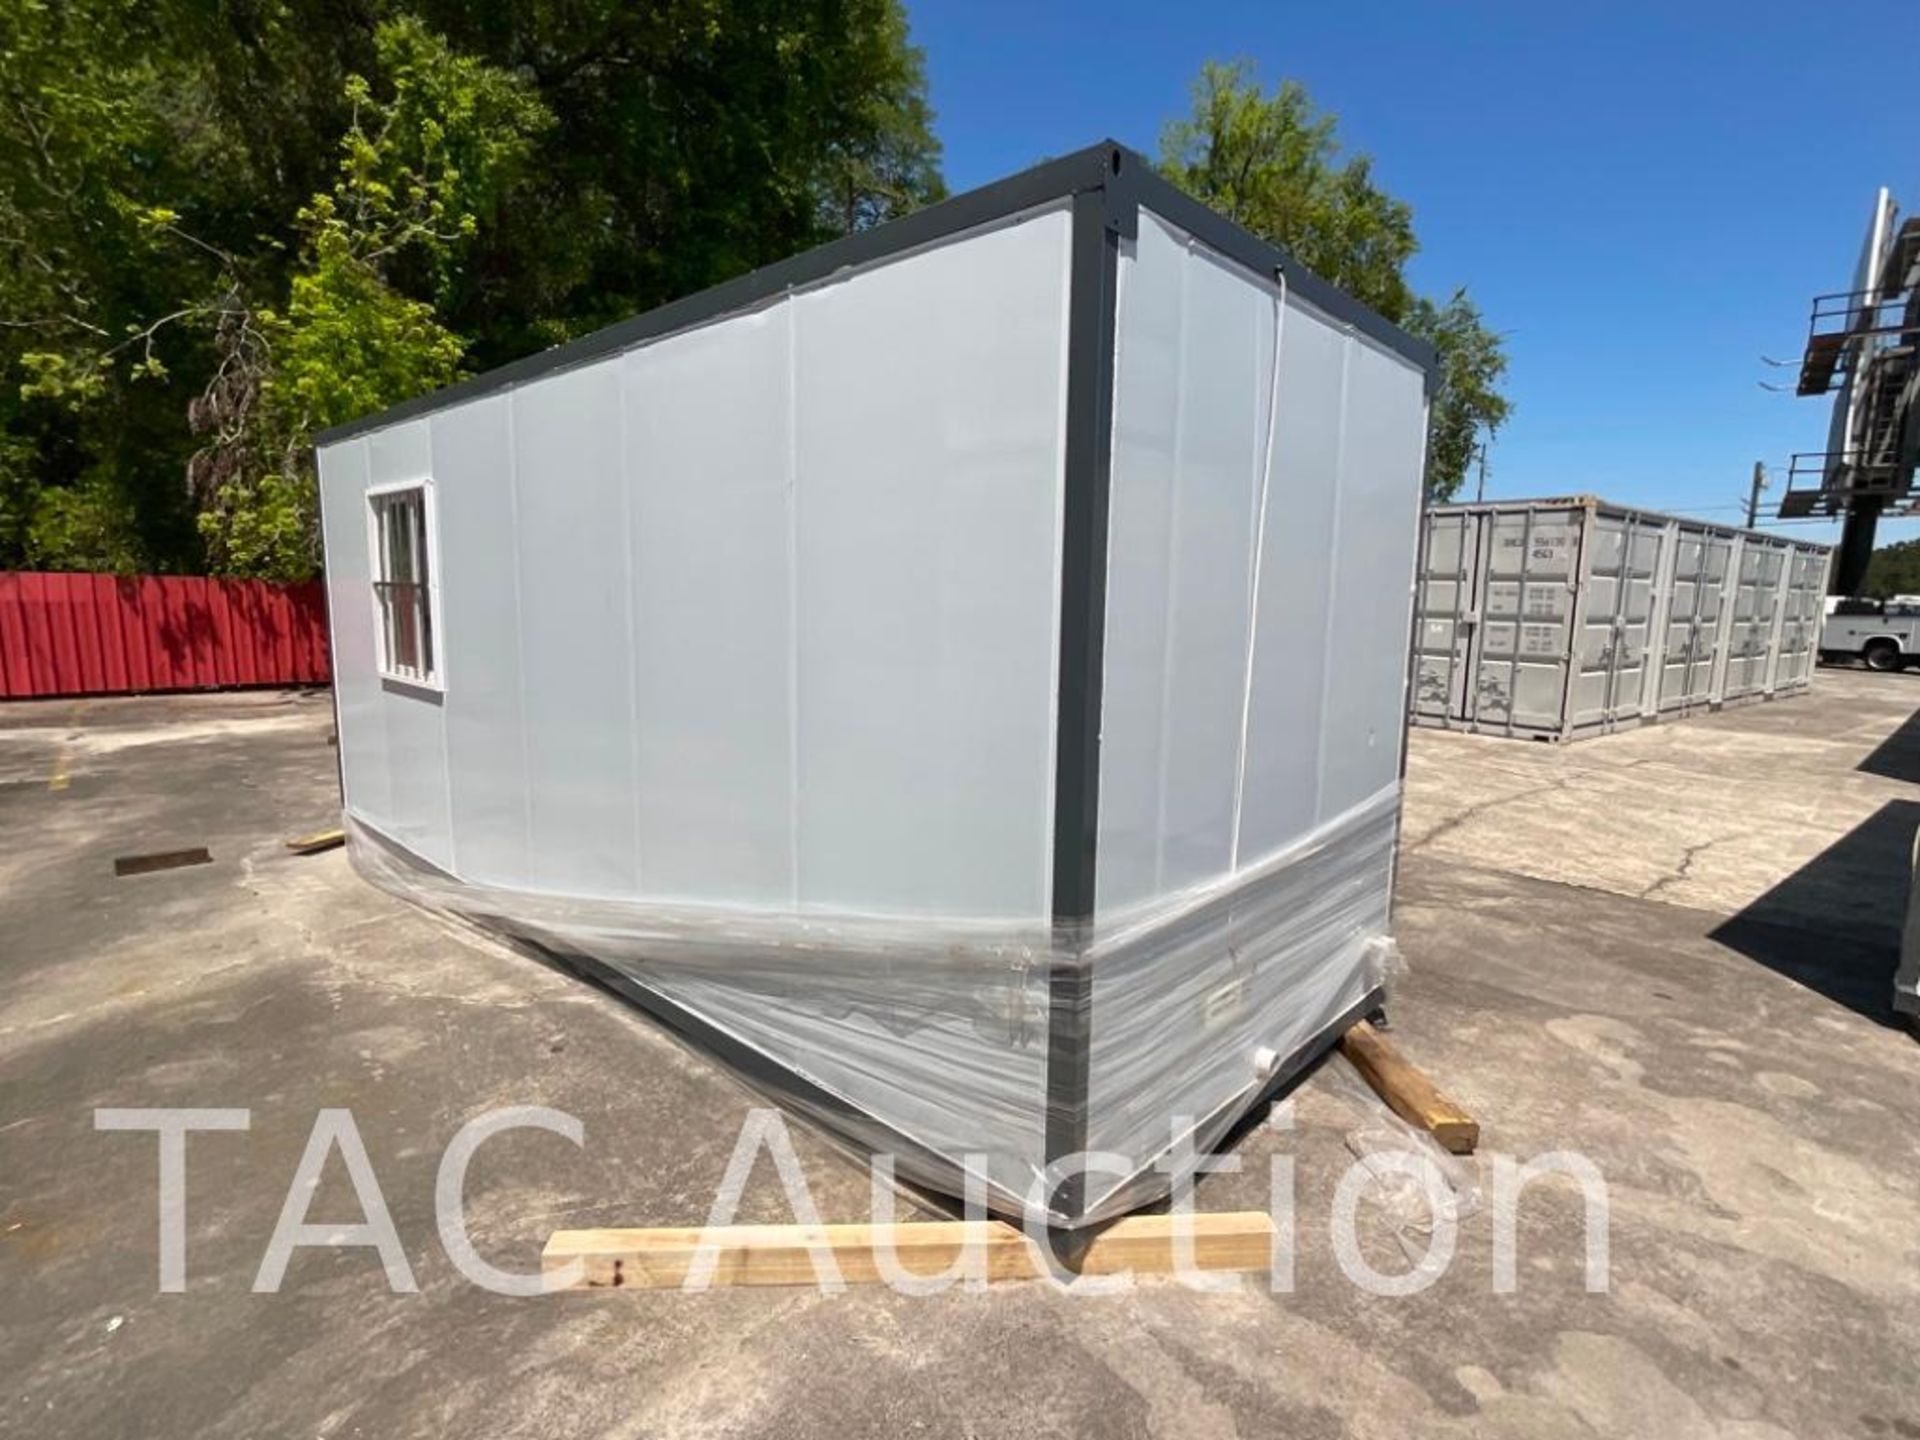 New Portable House With Bathroom - Image 5 of 15